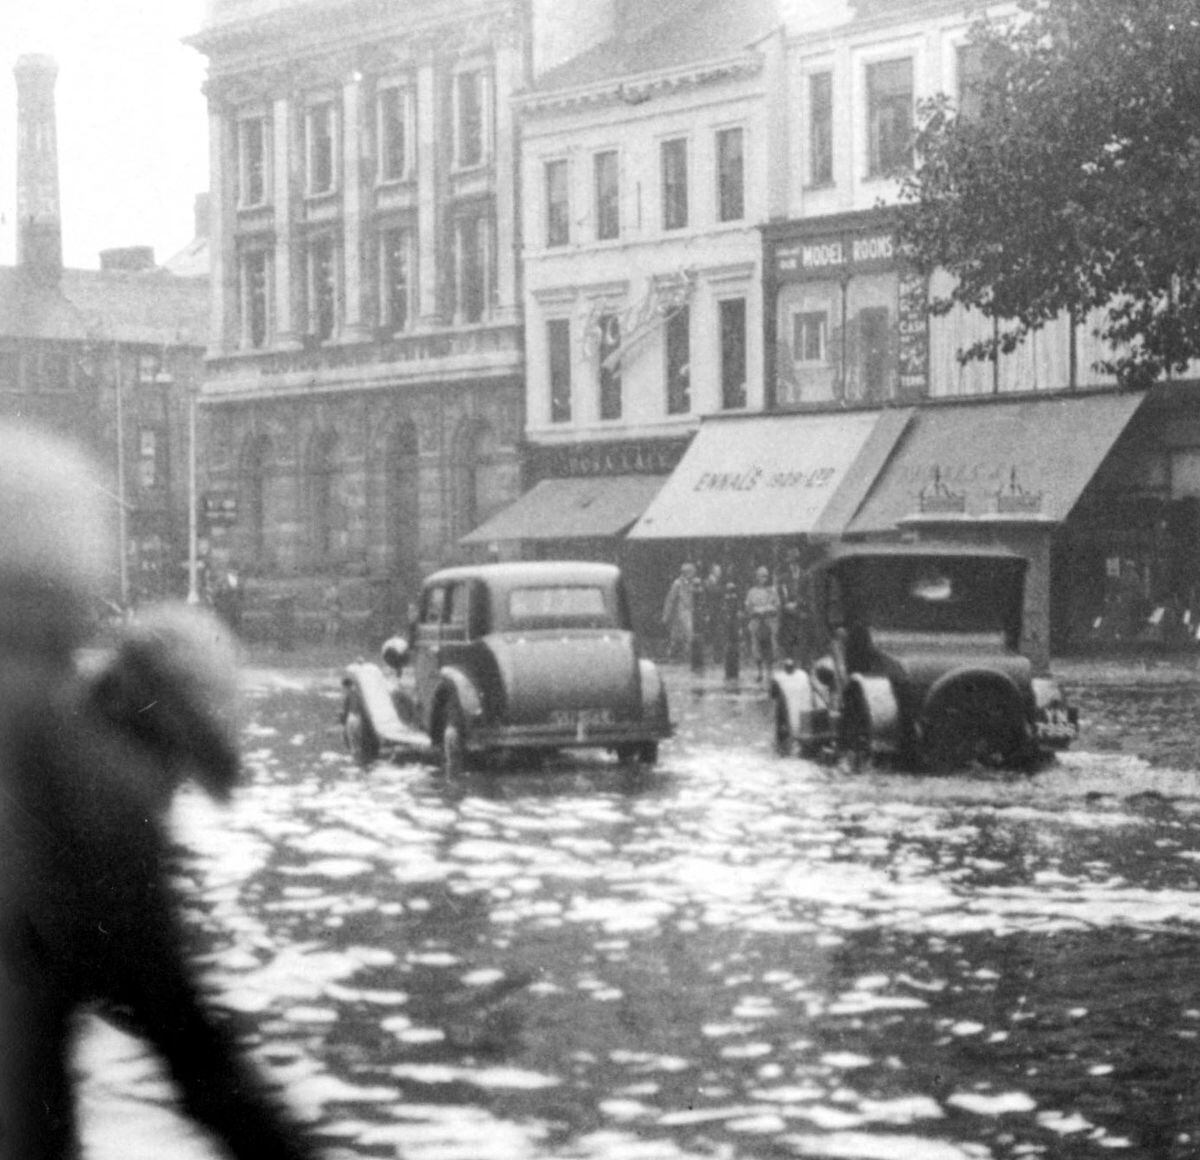 Flooded streets of Walsall. Based on the vintage of the cars it looks perhaps the 1920s.